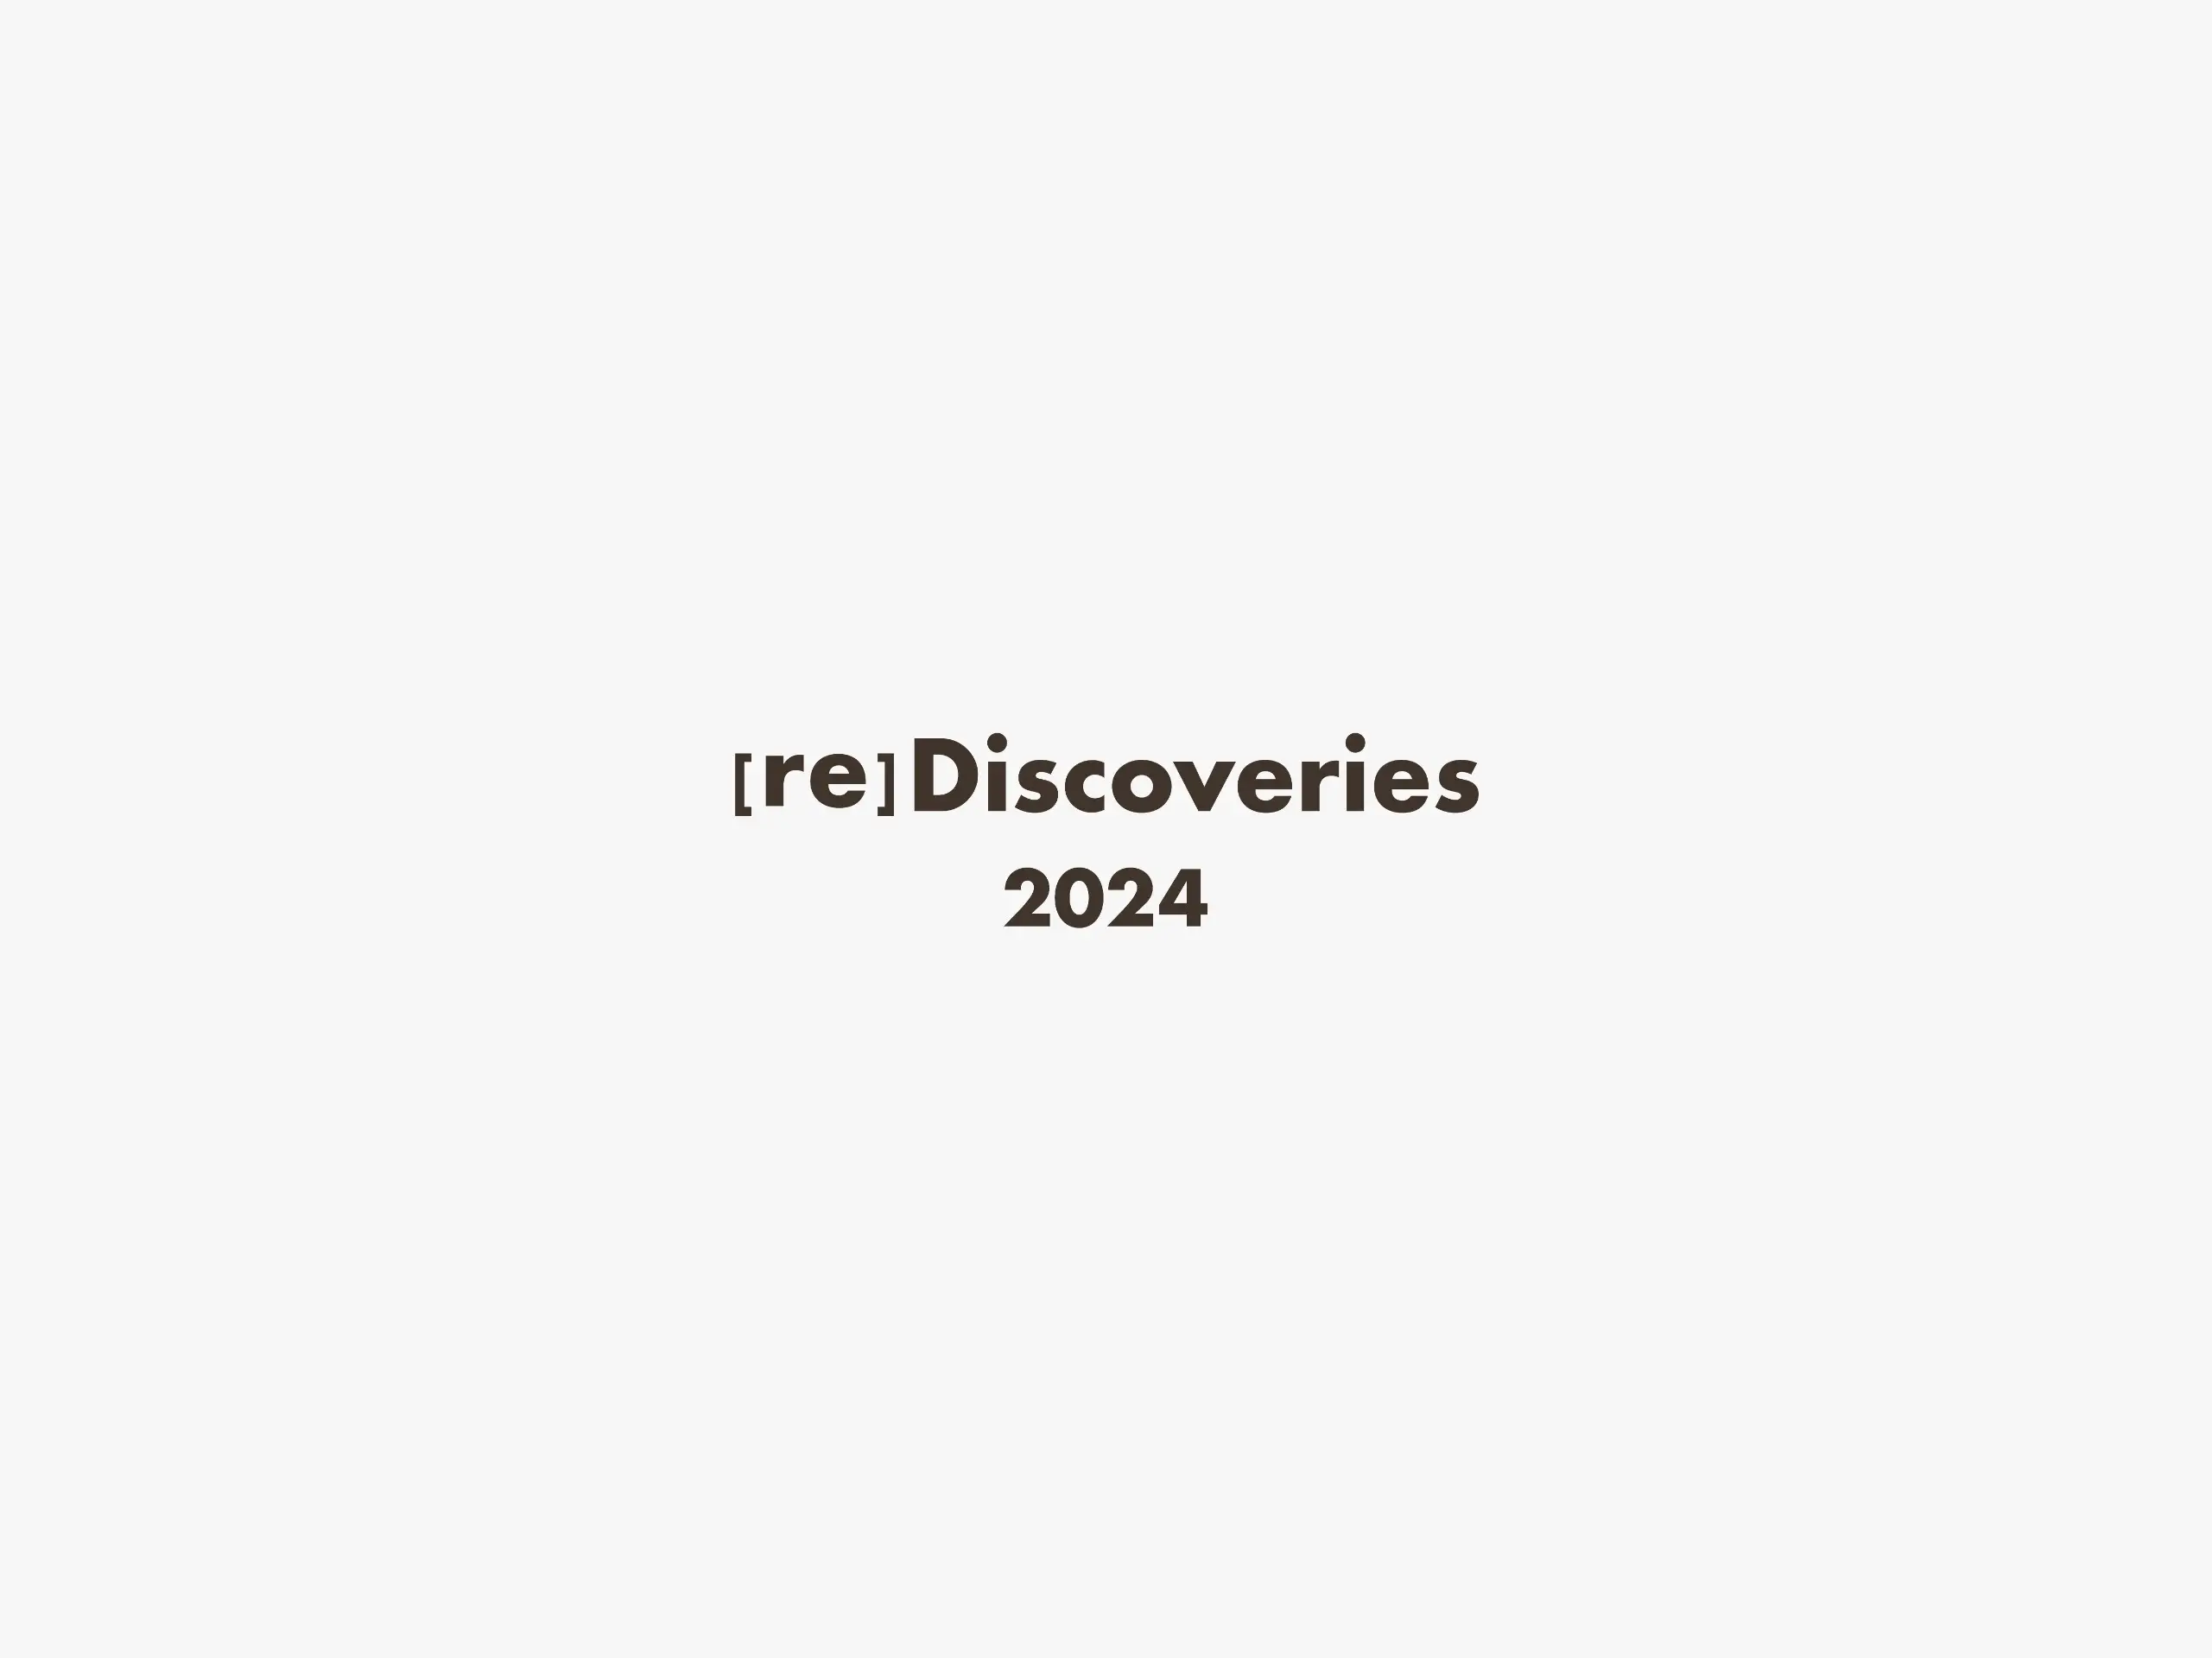 reDiscoveries